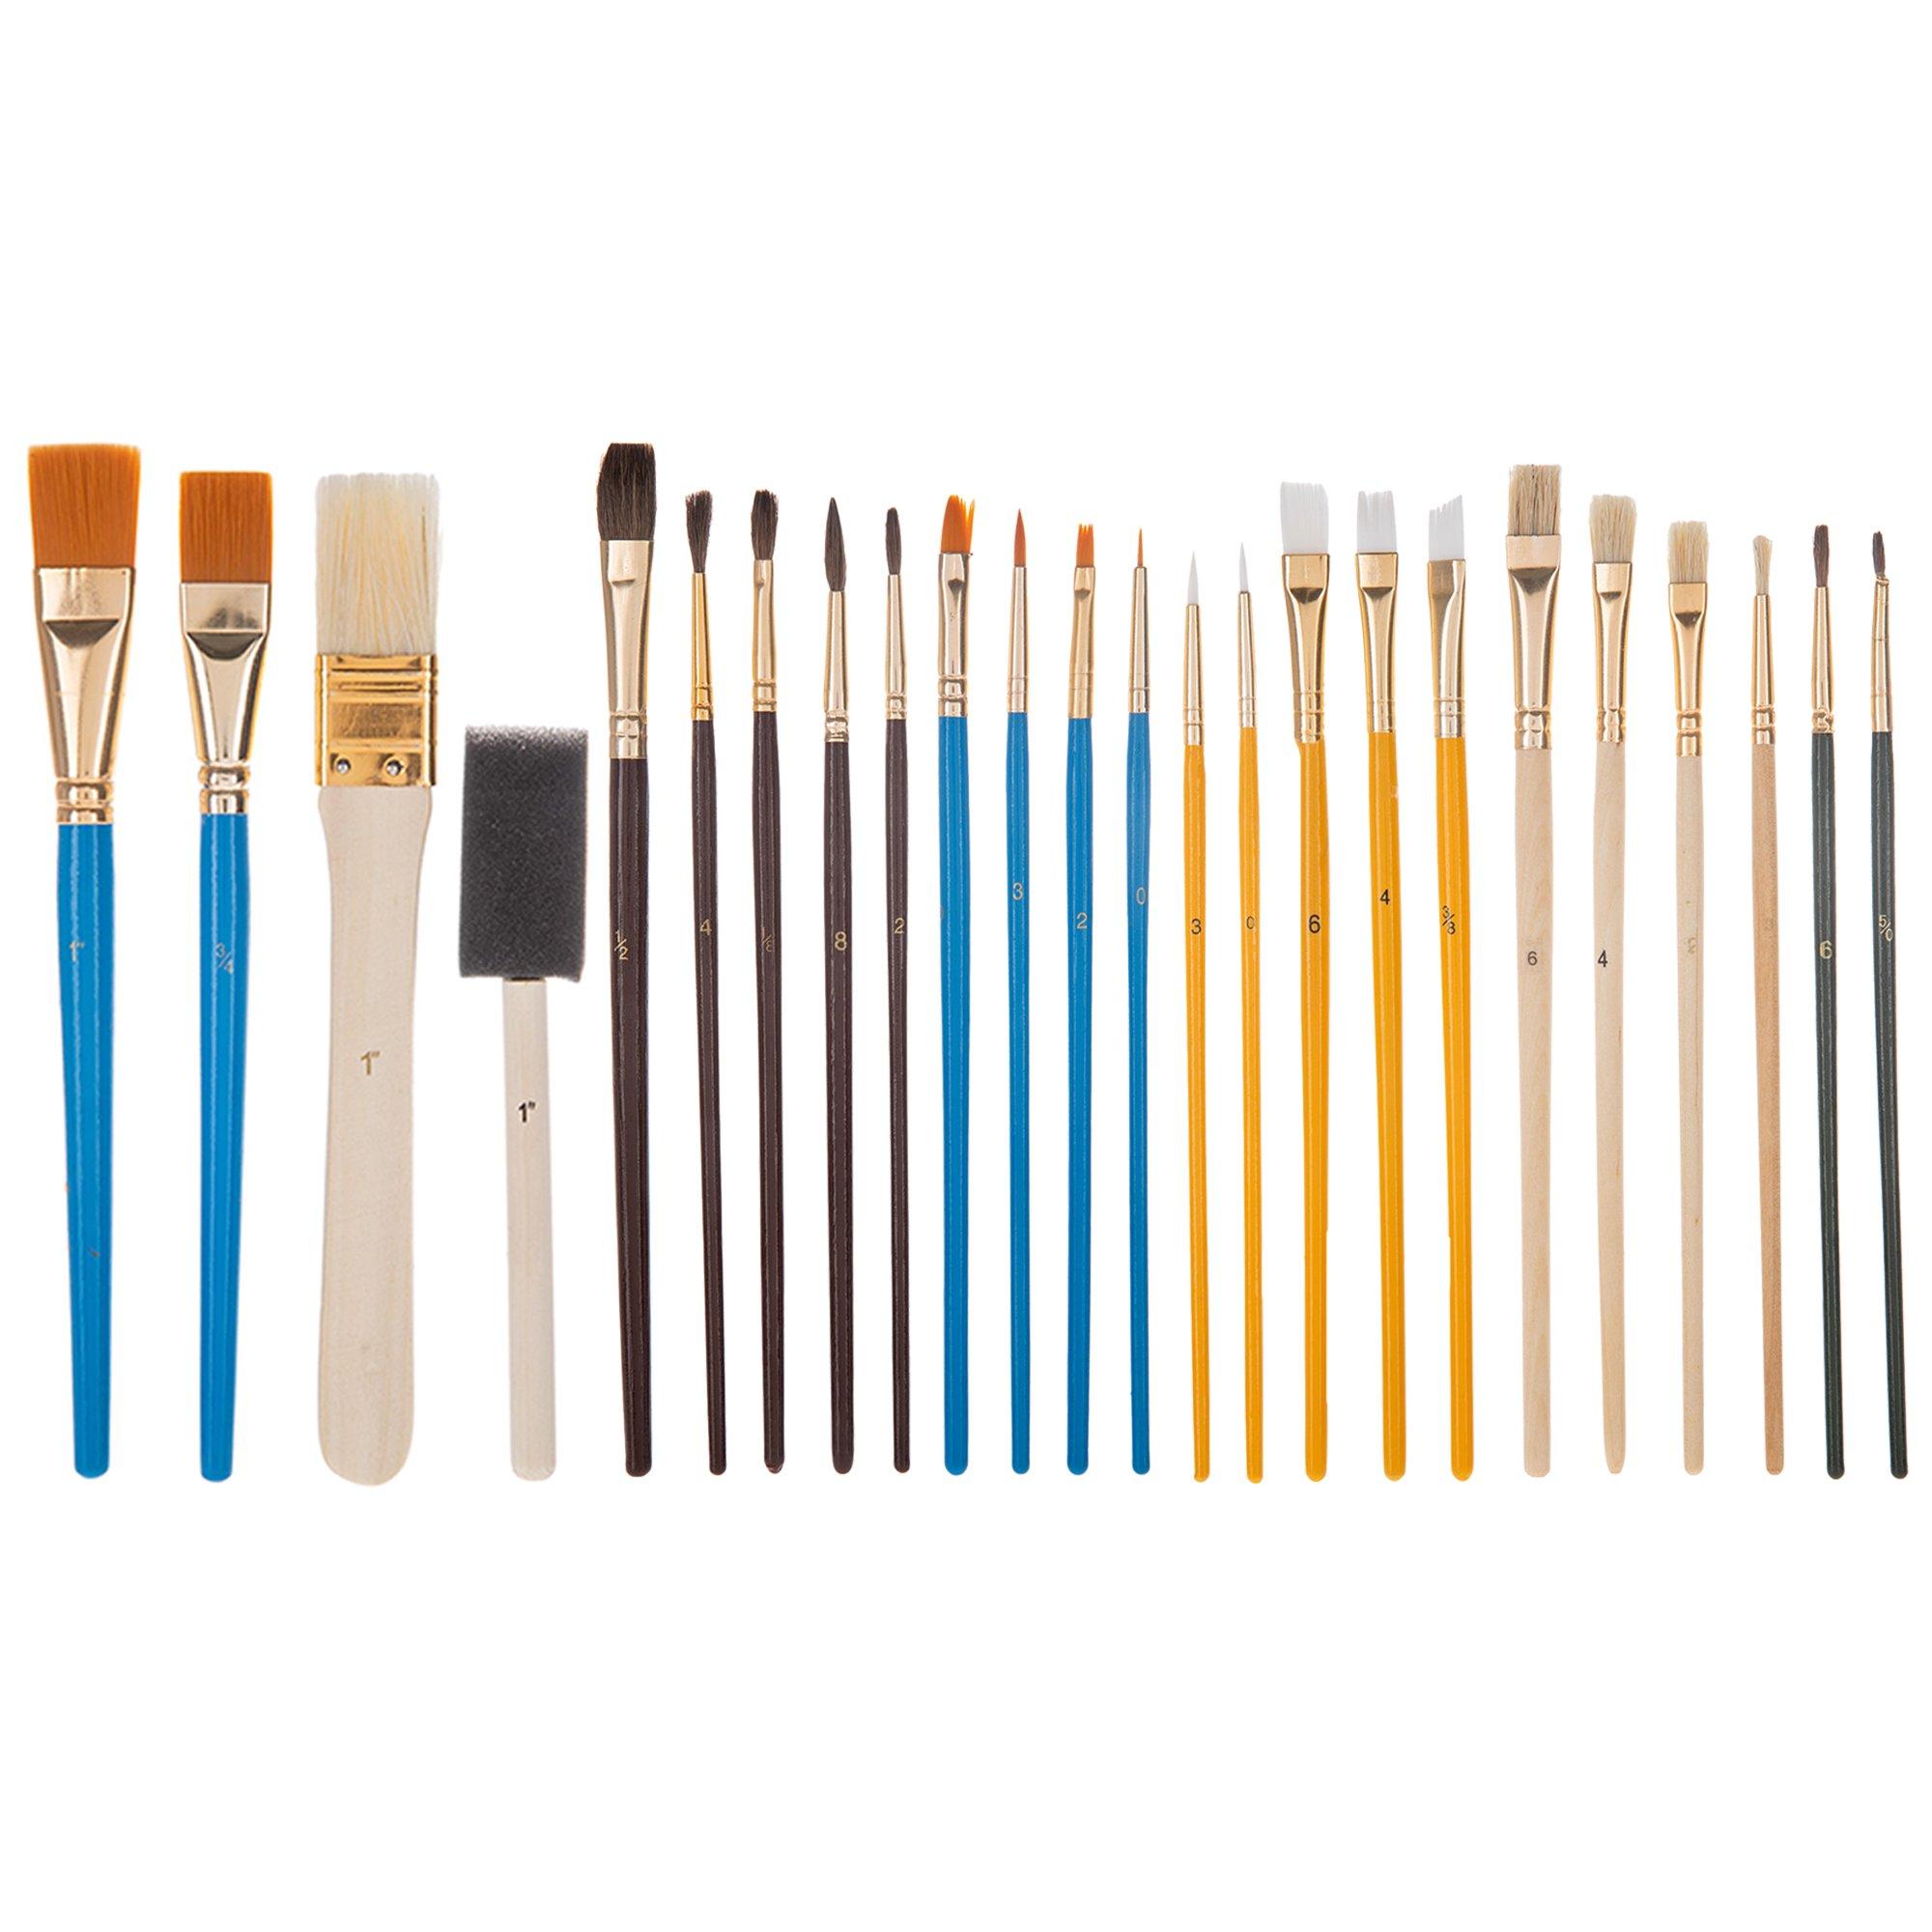 Royal & Langnickel Cool Art Stencil Brushes, 25pc